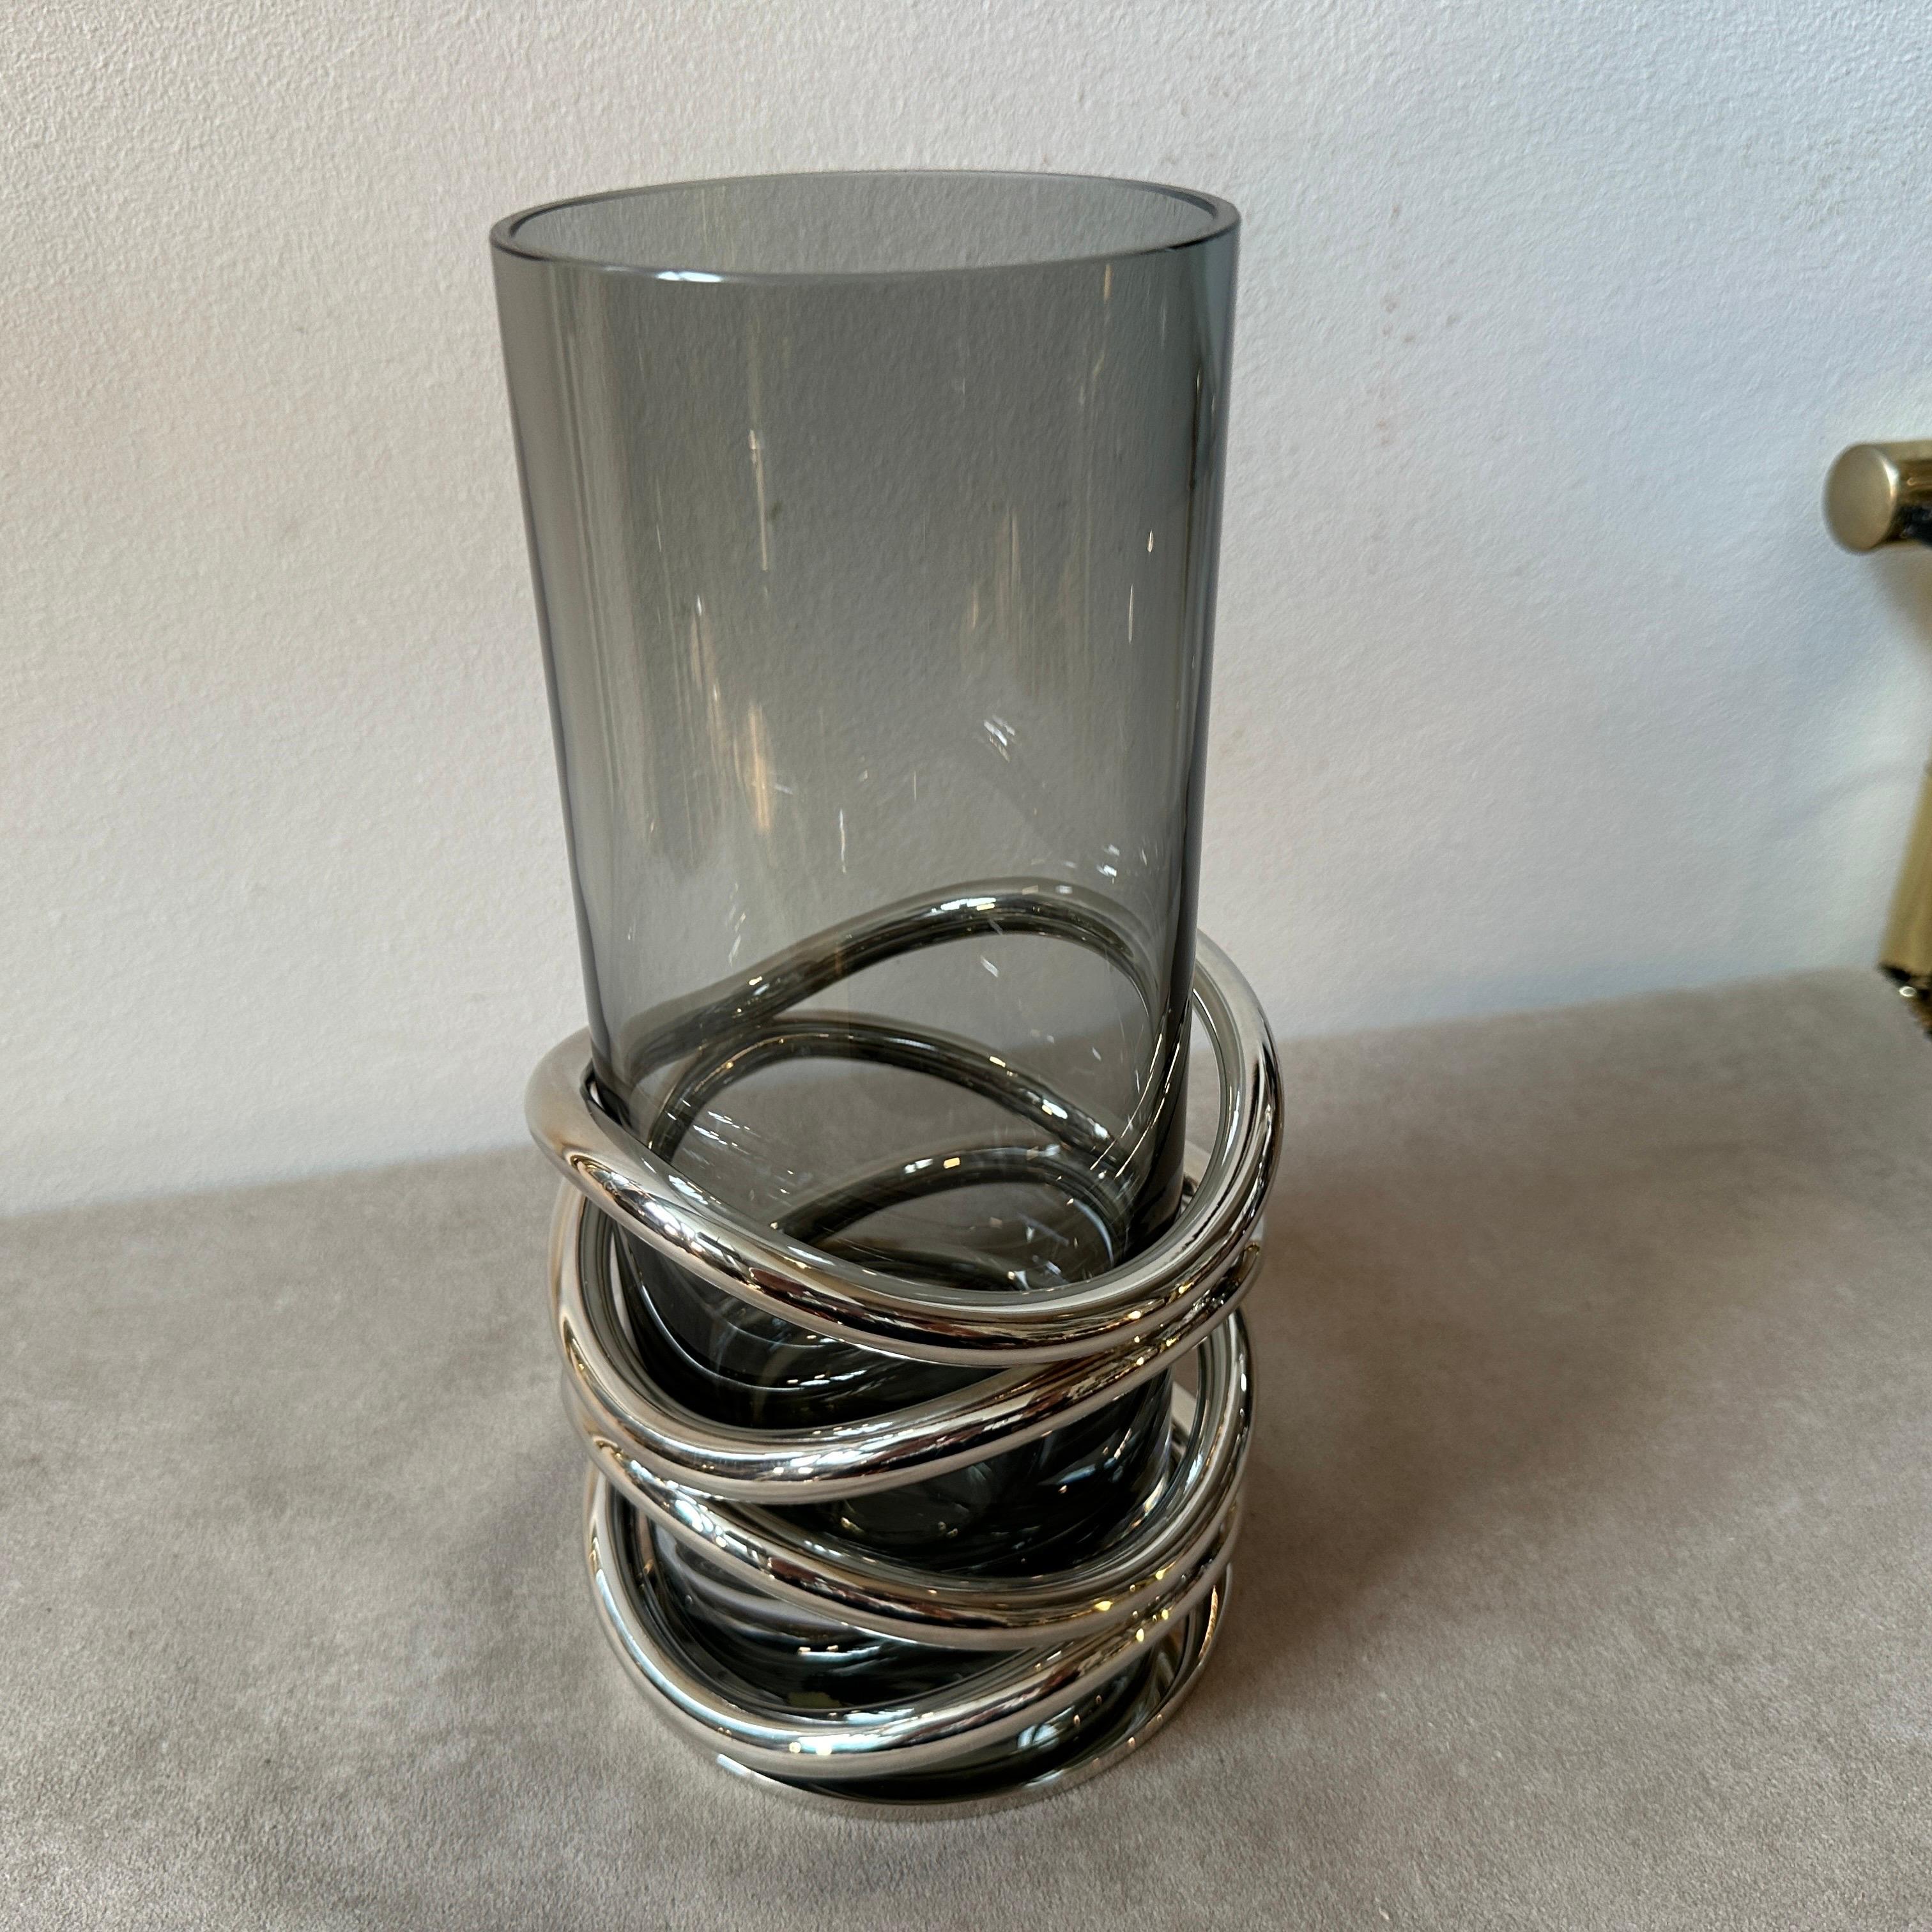 1990s Modernist Silver Plated and Smoked Glass Thomas French Vase by Christofle For Sale 3